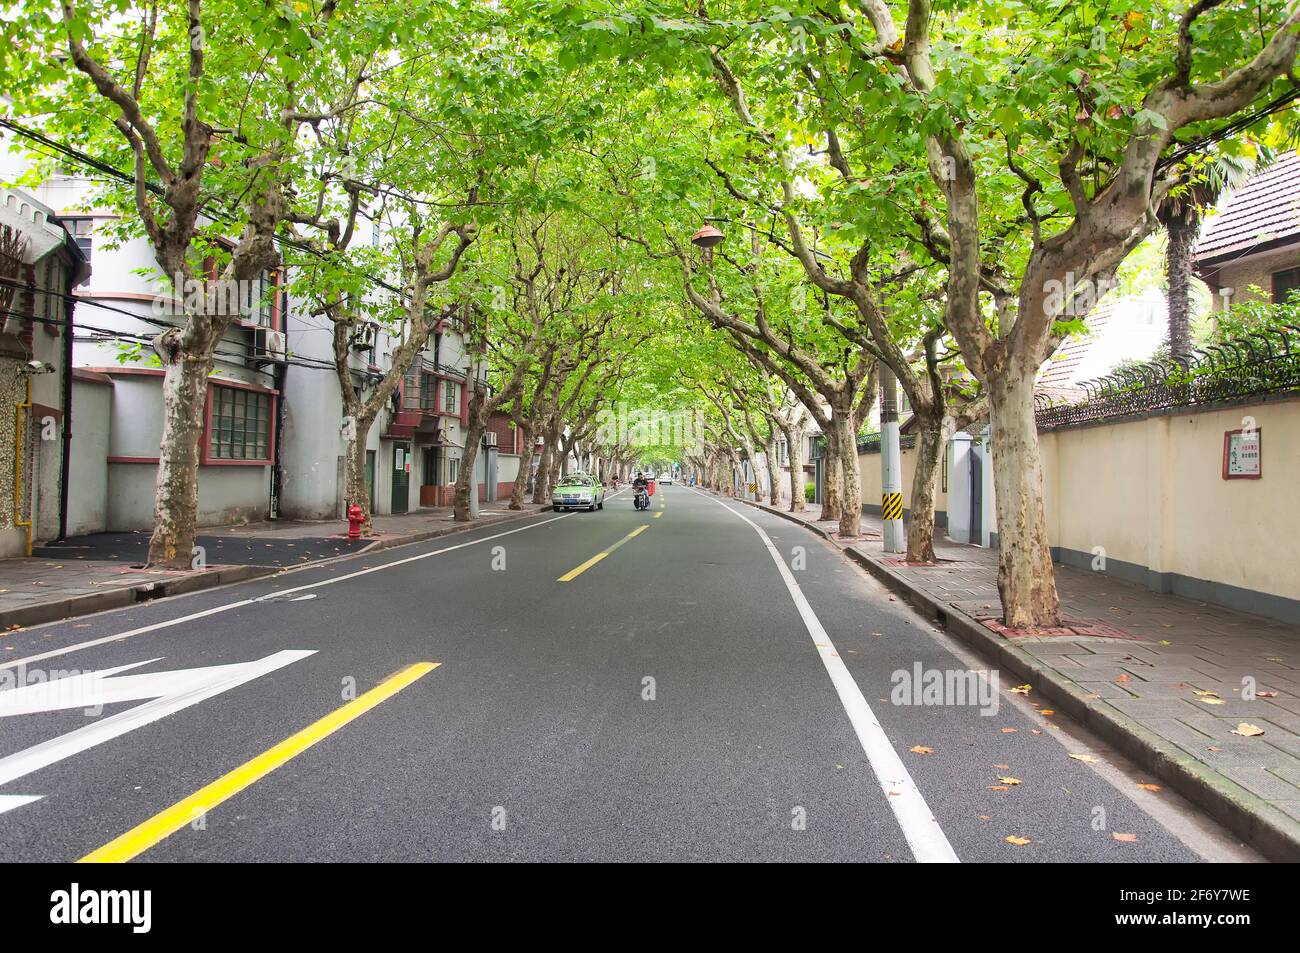 Shanghai, China. October 5, 2015.  famous sycamore trees lining a road in the french concession on the puxi side of shanghaii china. Stock Photo